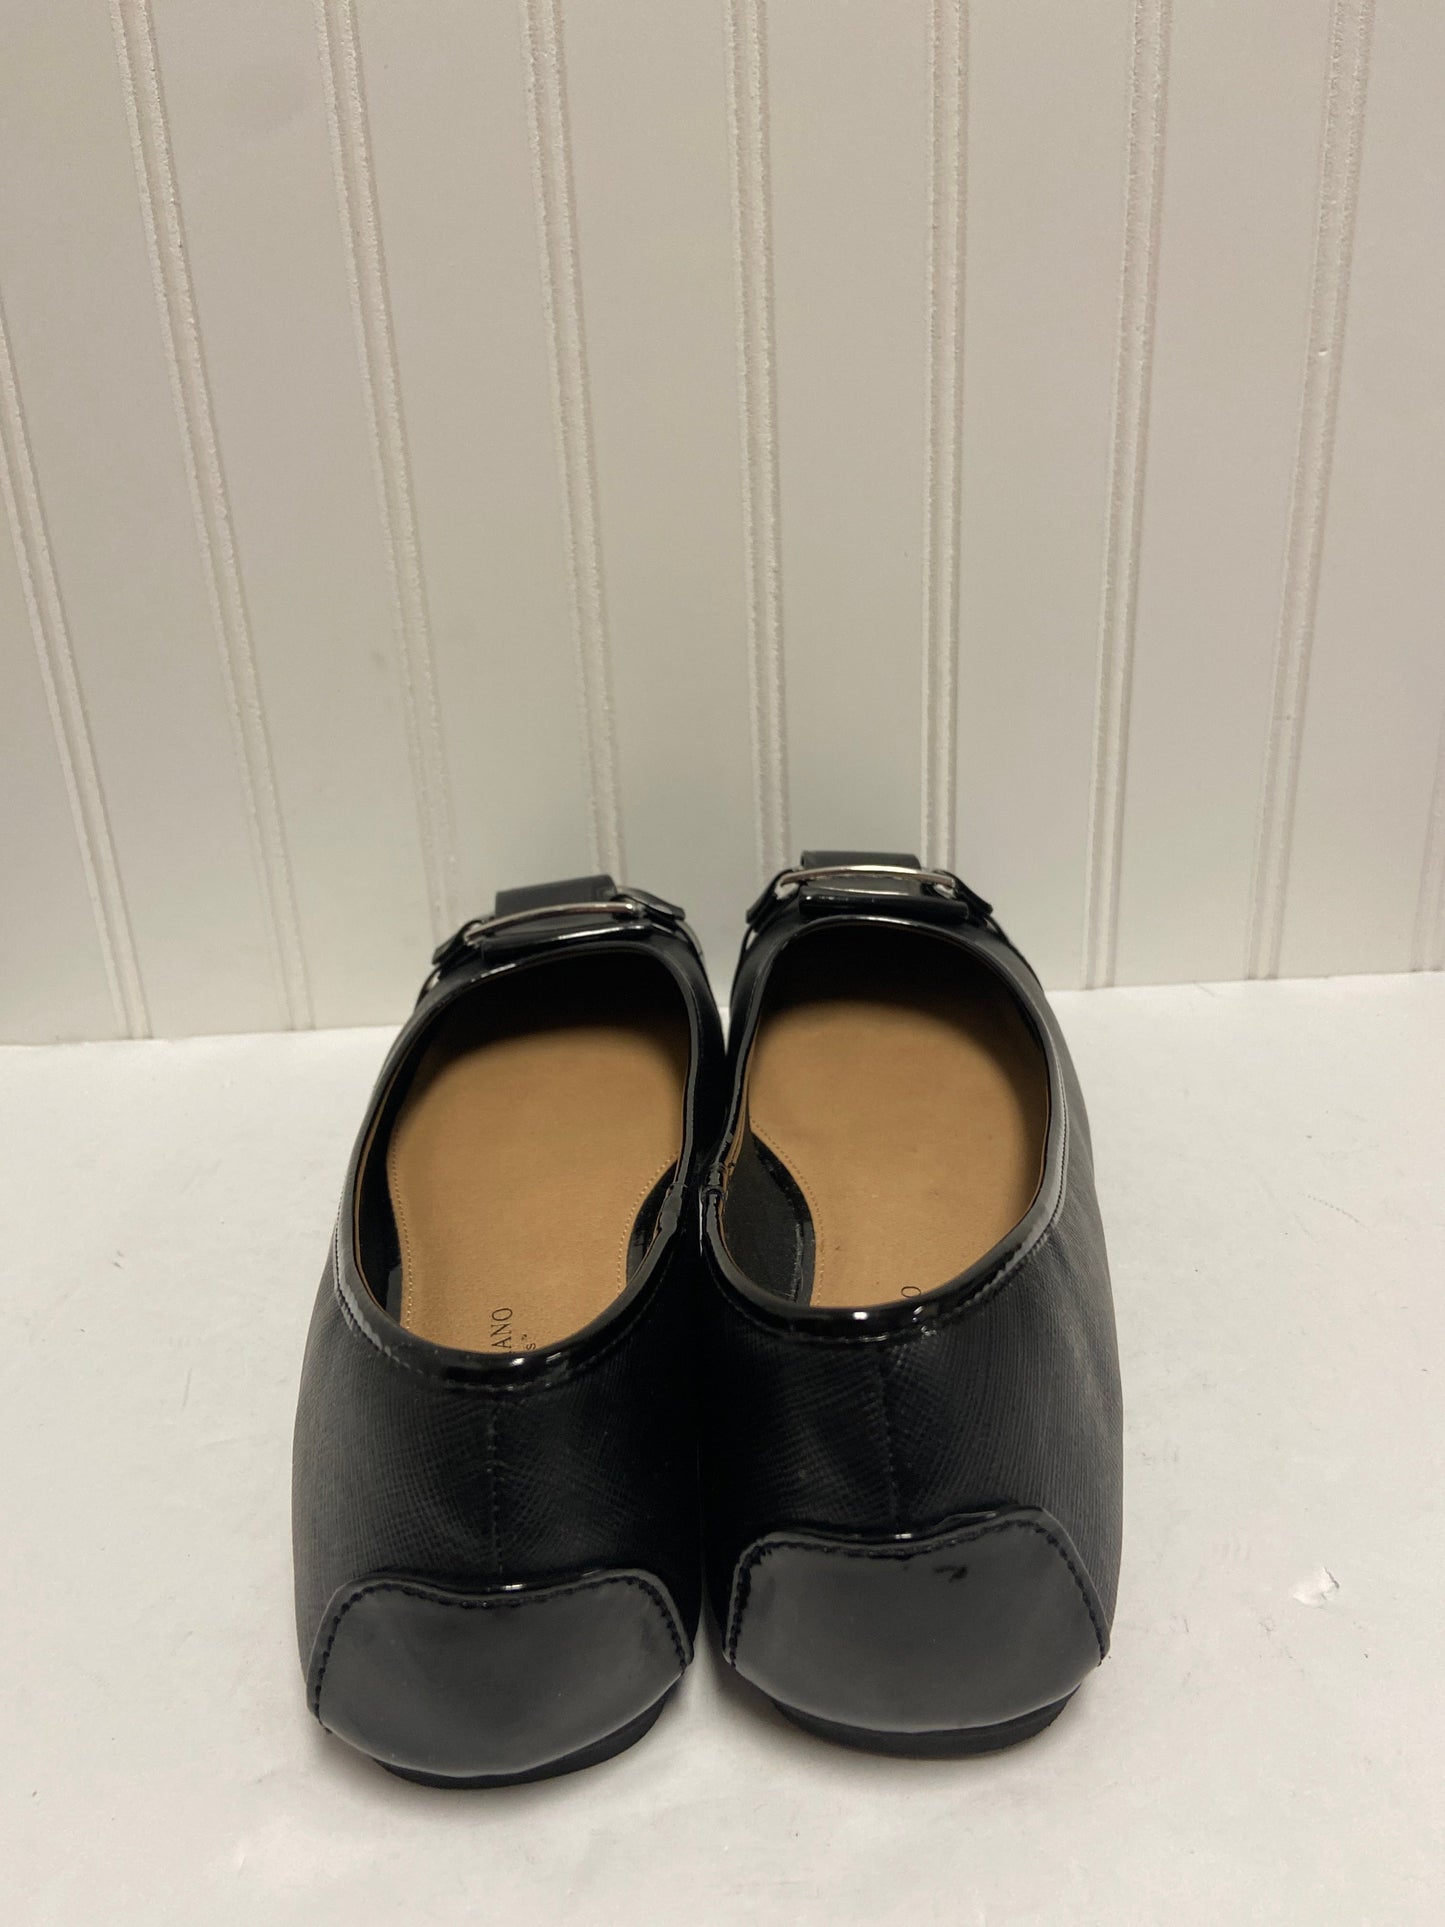 Shoes Flats By Christian Siriano  Size: 10